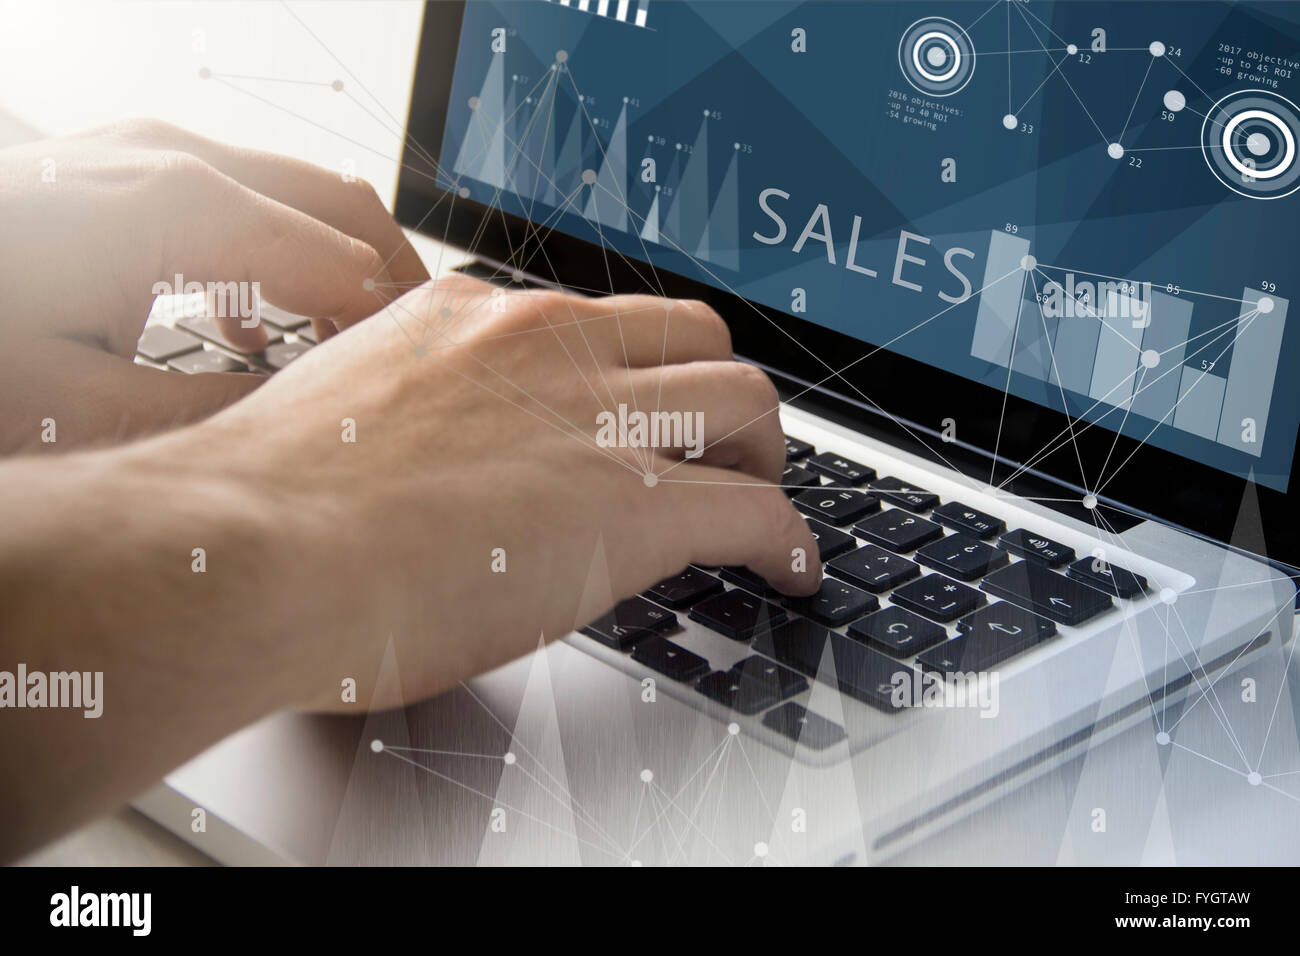 technology and business concept: man using a laptop with sales on the screen. All screen graphics are made up. Stock Photo